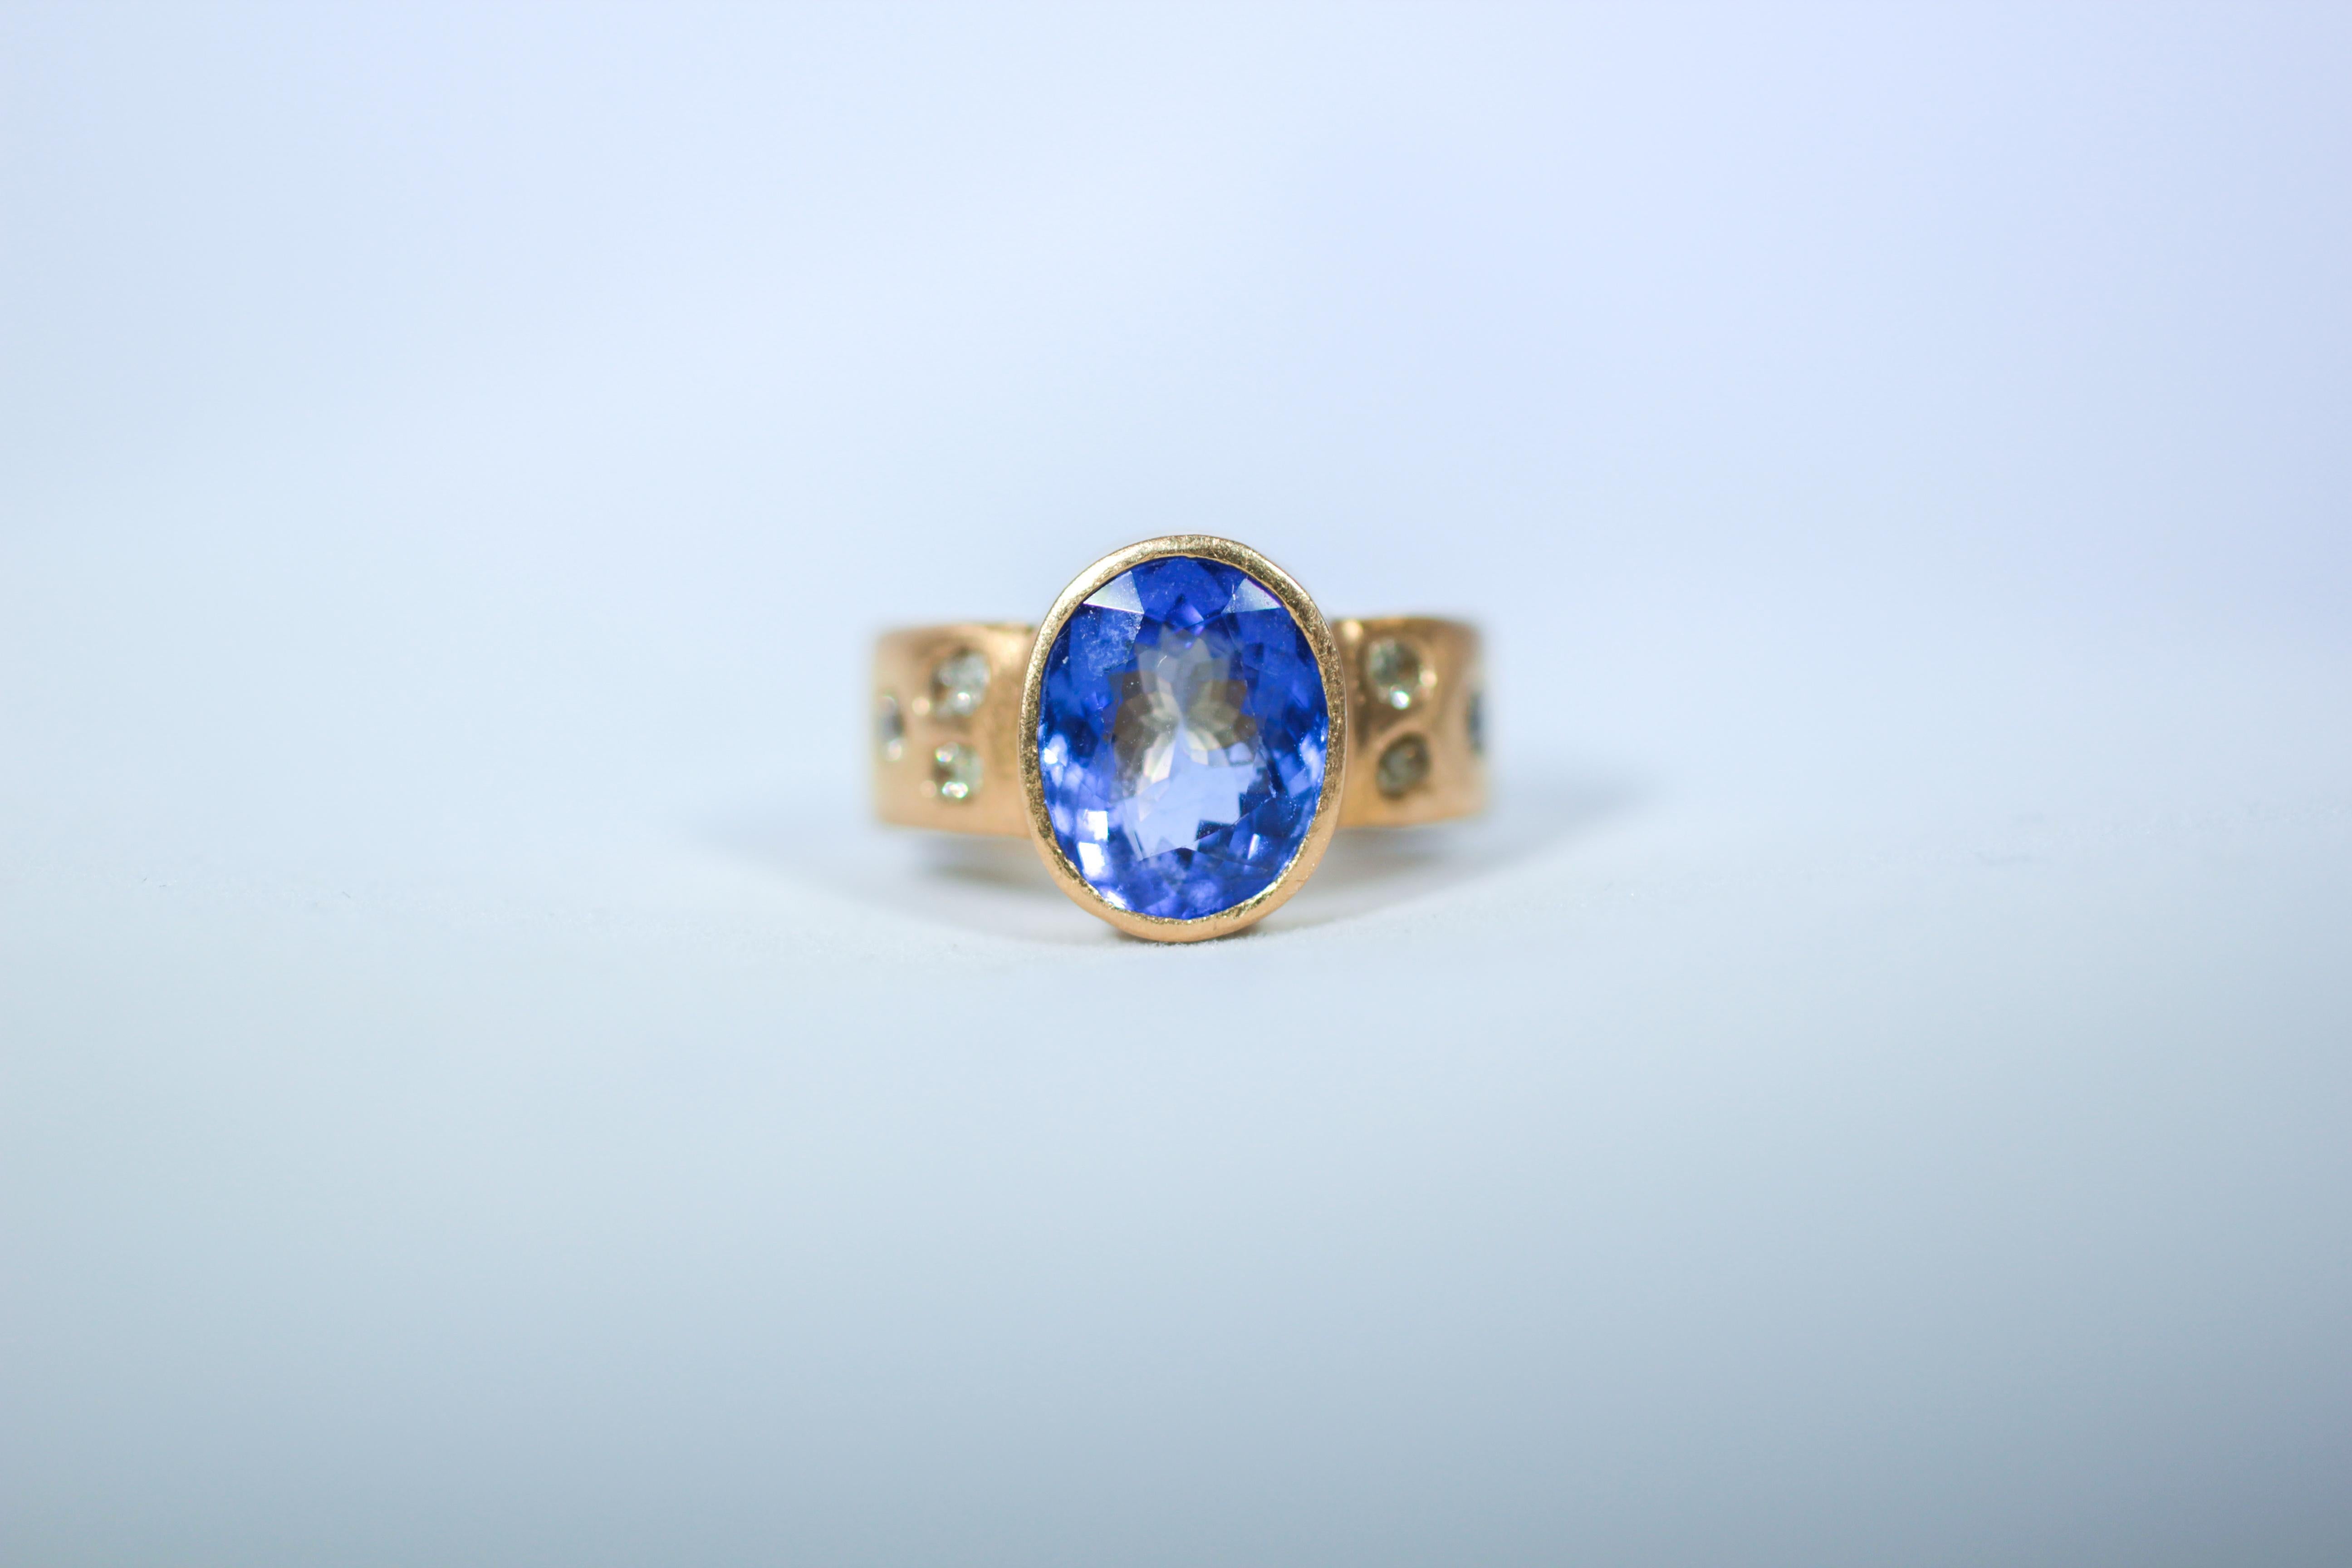 Bridal 21K gold ring featuring 4.6Ct Tanzanite solitaire surrounded by a melee of six yellow free-form rose-cut diamonds. Our elegant Violet Ring delivers a pop of color. The intense blue-purple tanzanite is set in a lush-colored satin 22K gold